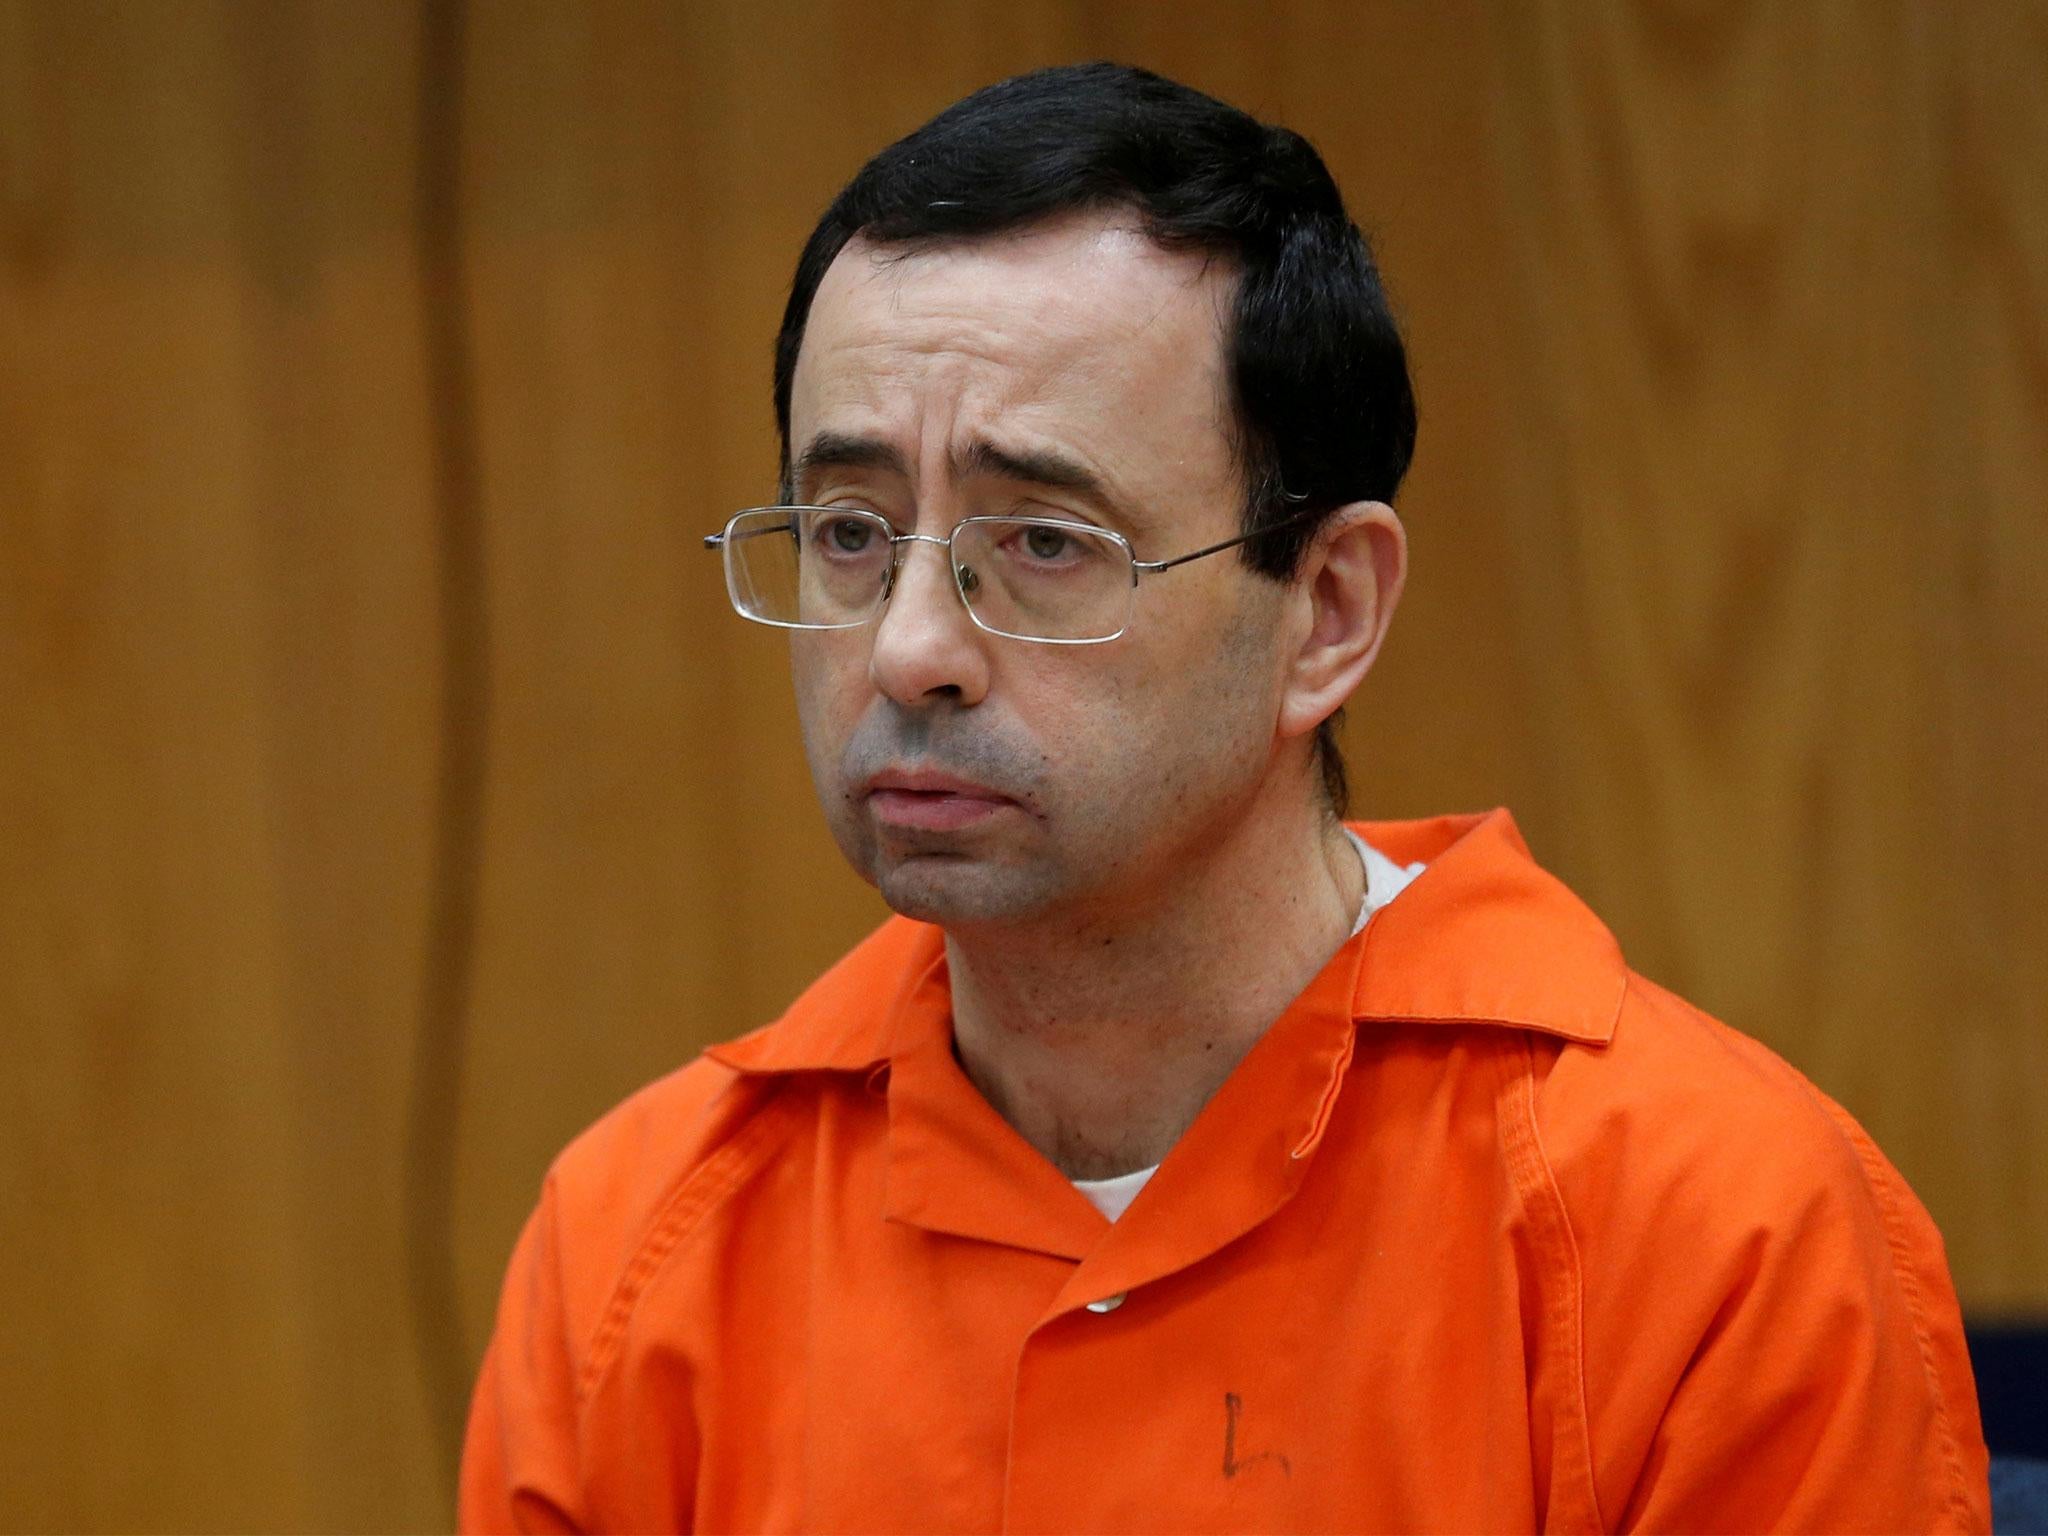 More than 260 women have claimed they were sexually abused by Larry Nassar